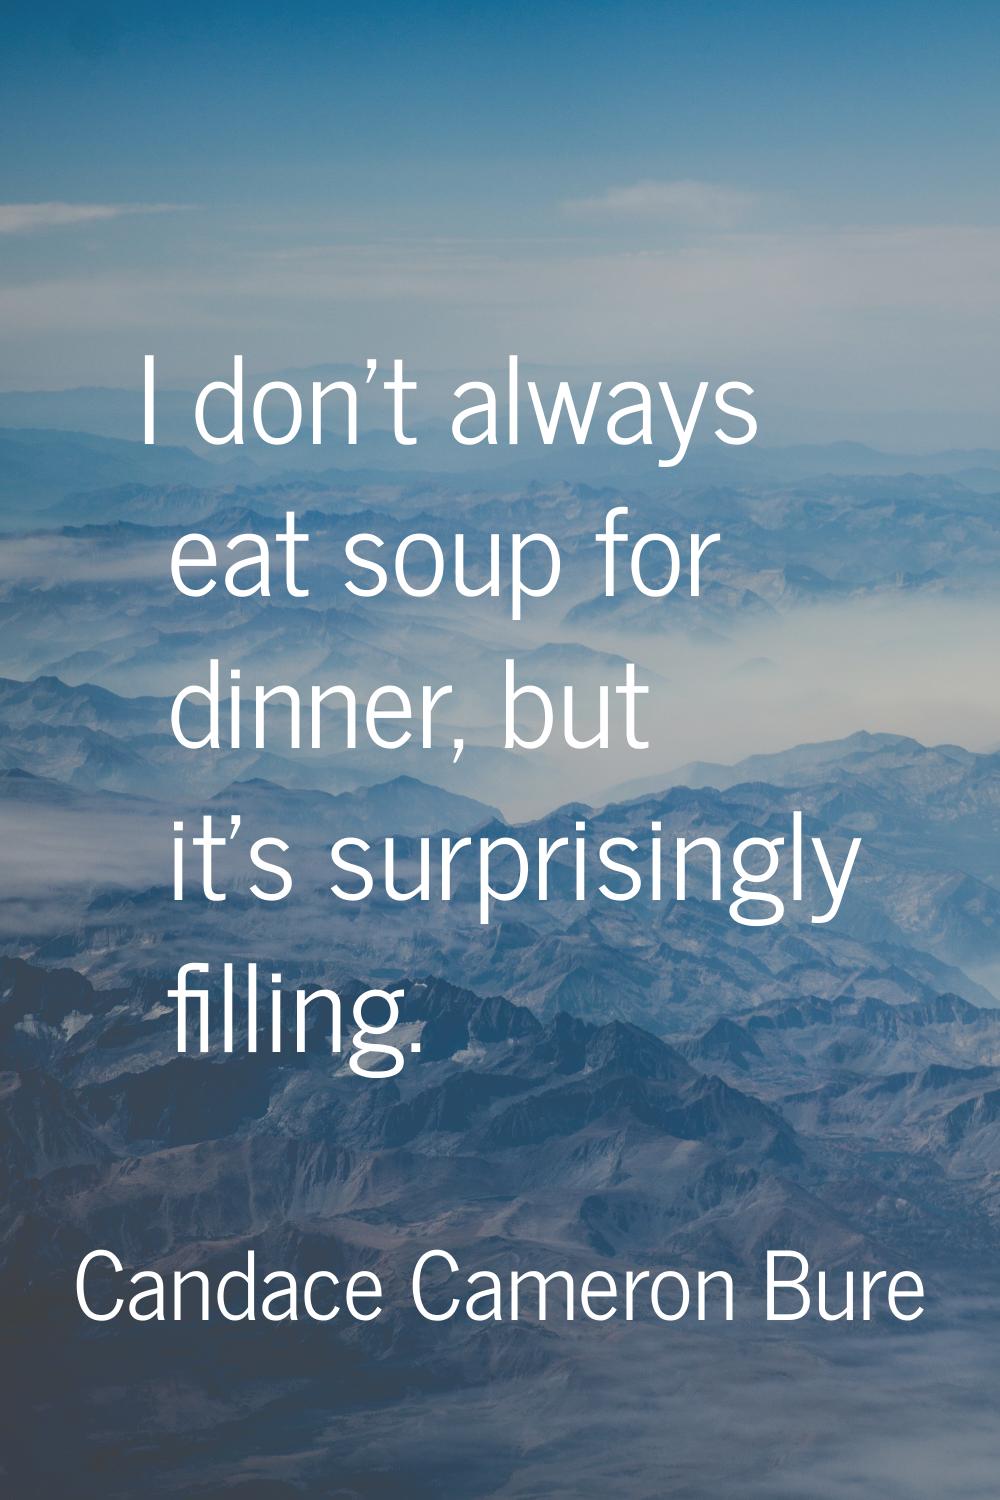 I don't always eat soup for dinner, but it's surprisingly filling.